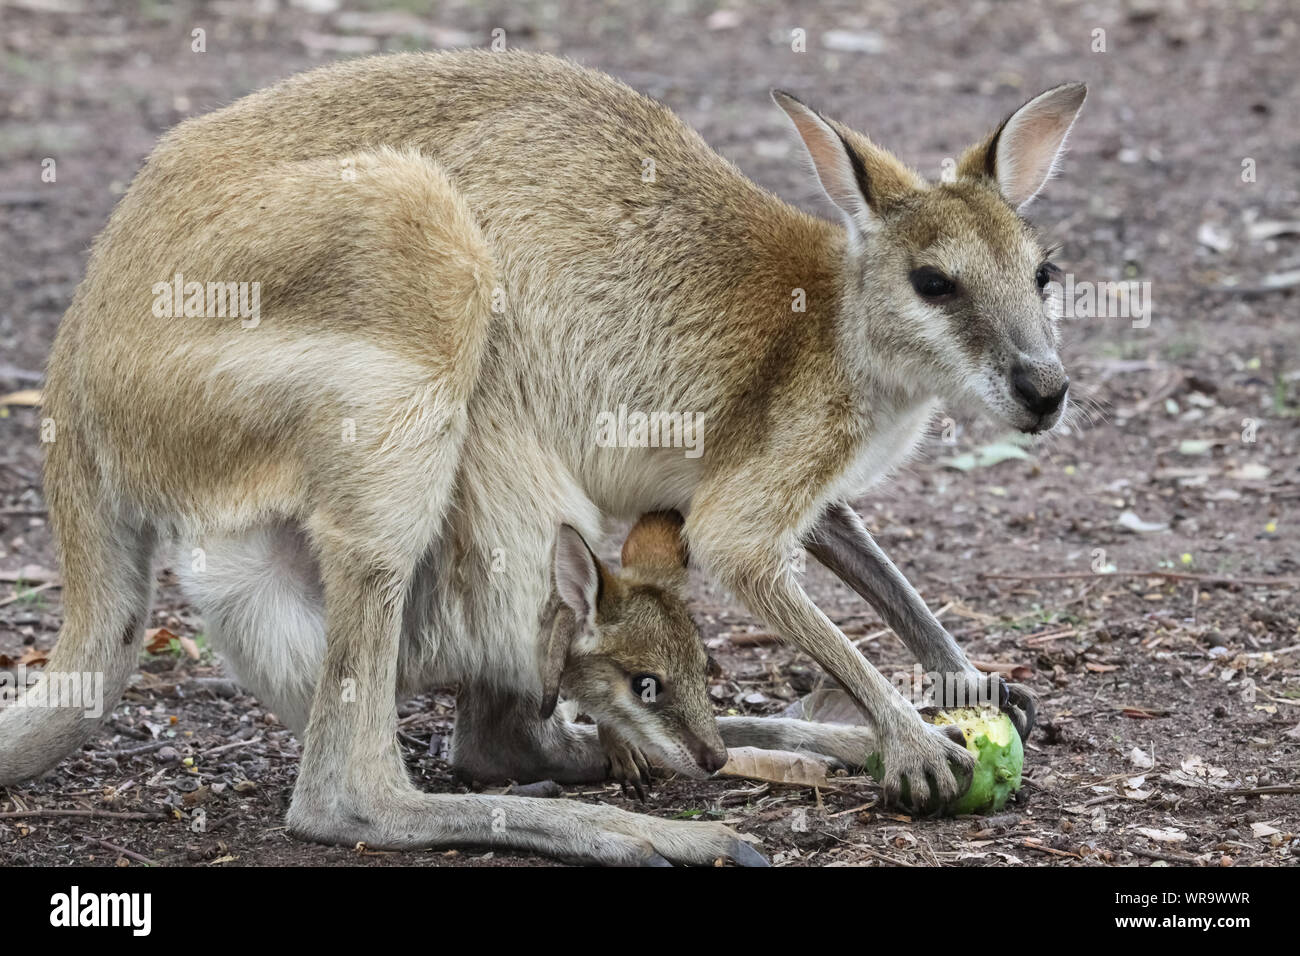 Agile wallaby mother with baby feeding on fruit, Northern Territory, Australia Stock Photo